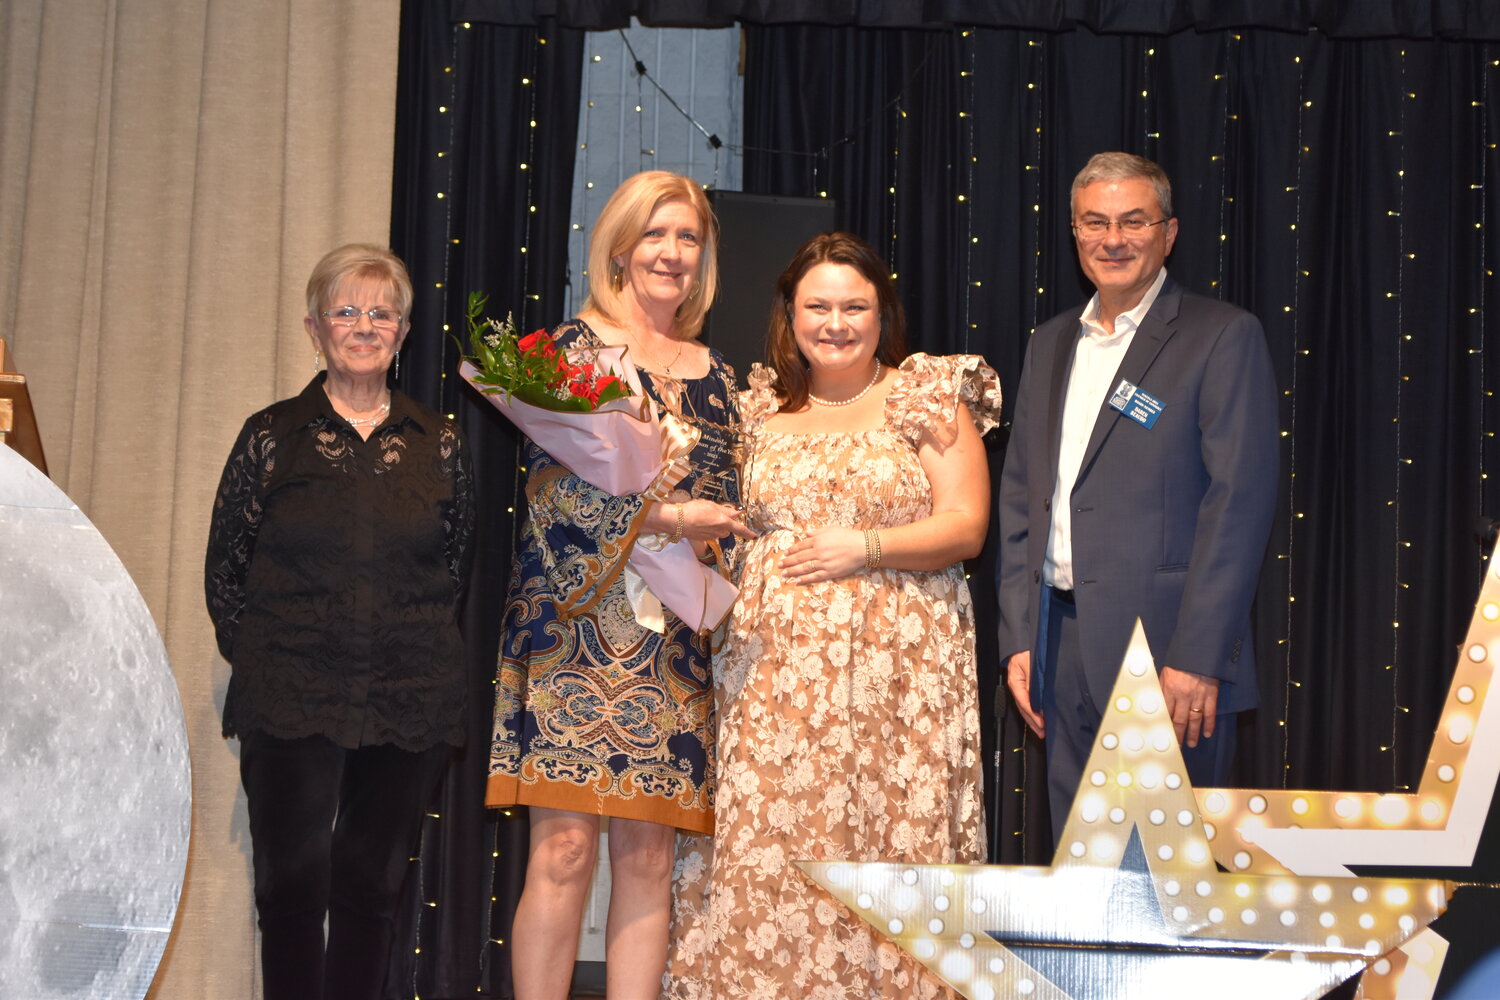 The Woman of the Year was awarded to Becky Moore, second from left, at last Thursday’s Mineola Chamber of Commerce banquet. From left are presenter Beth Shockey, Chamber President Kelsie McGilvray and Vice President Daren Beaudo.